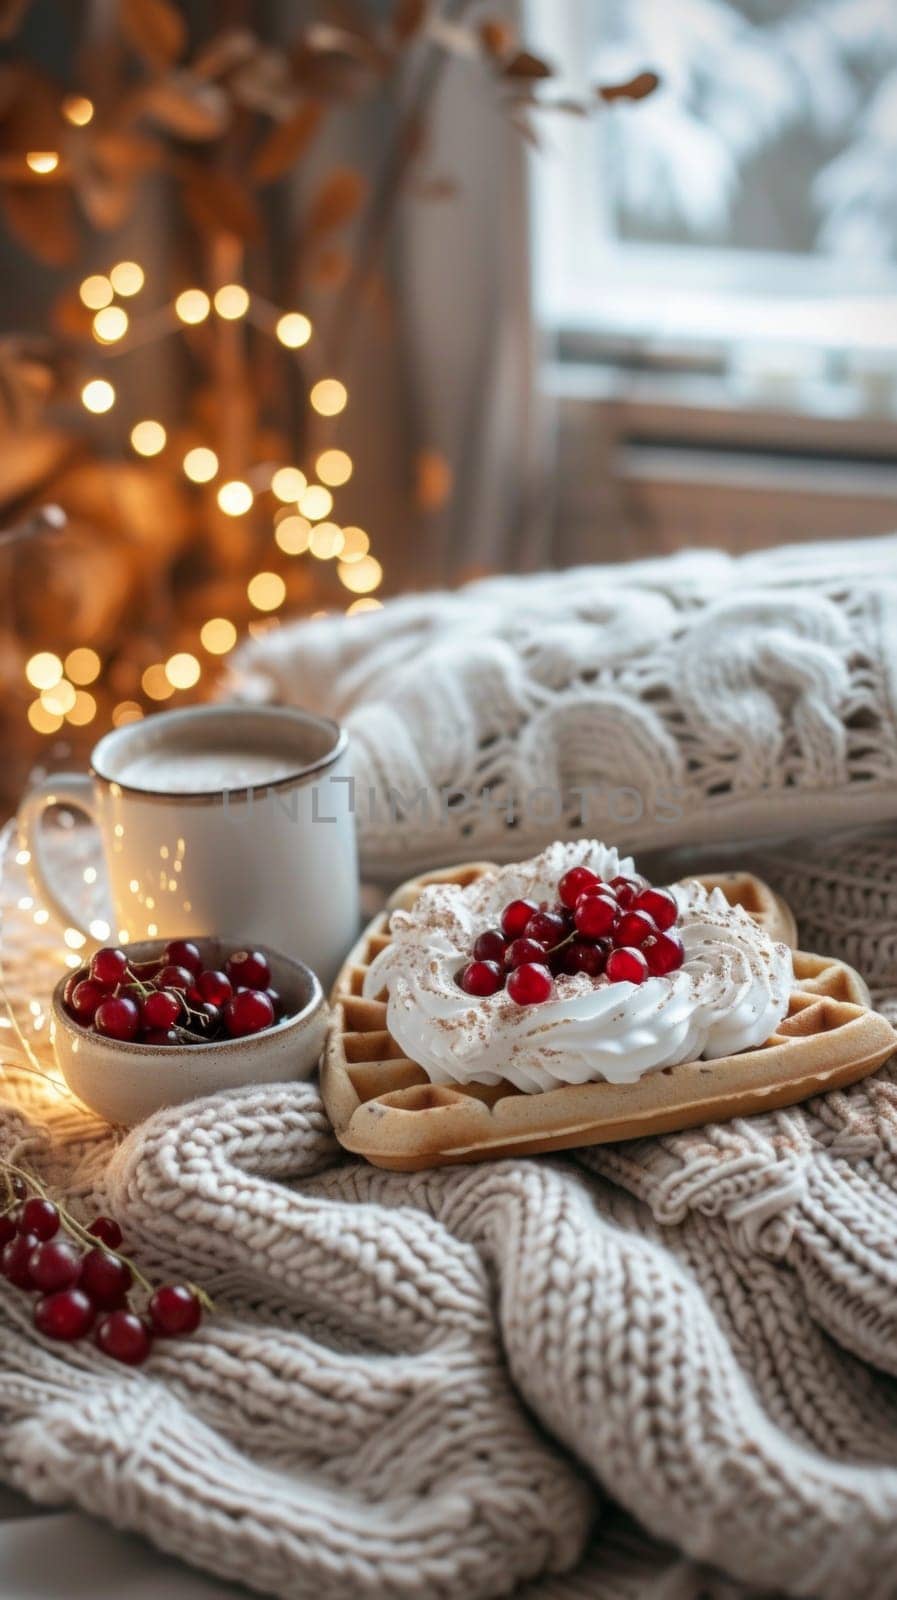 A waffle with cherries and whipped cream on a bed